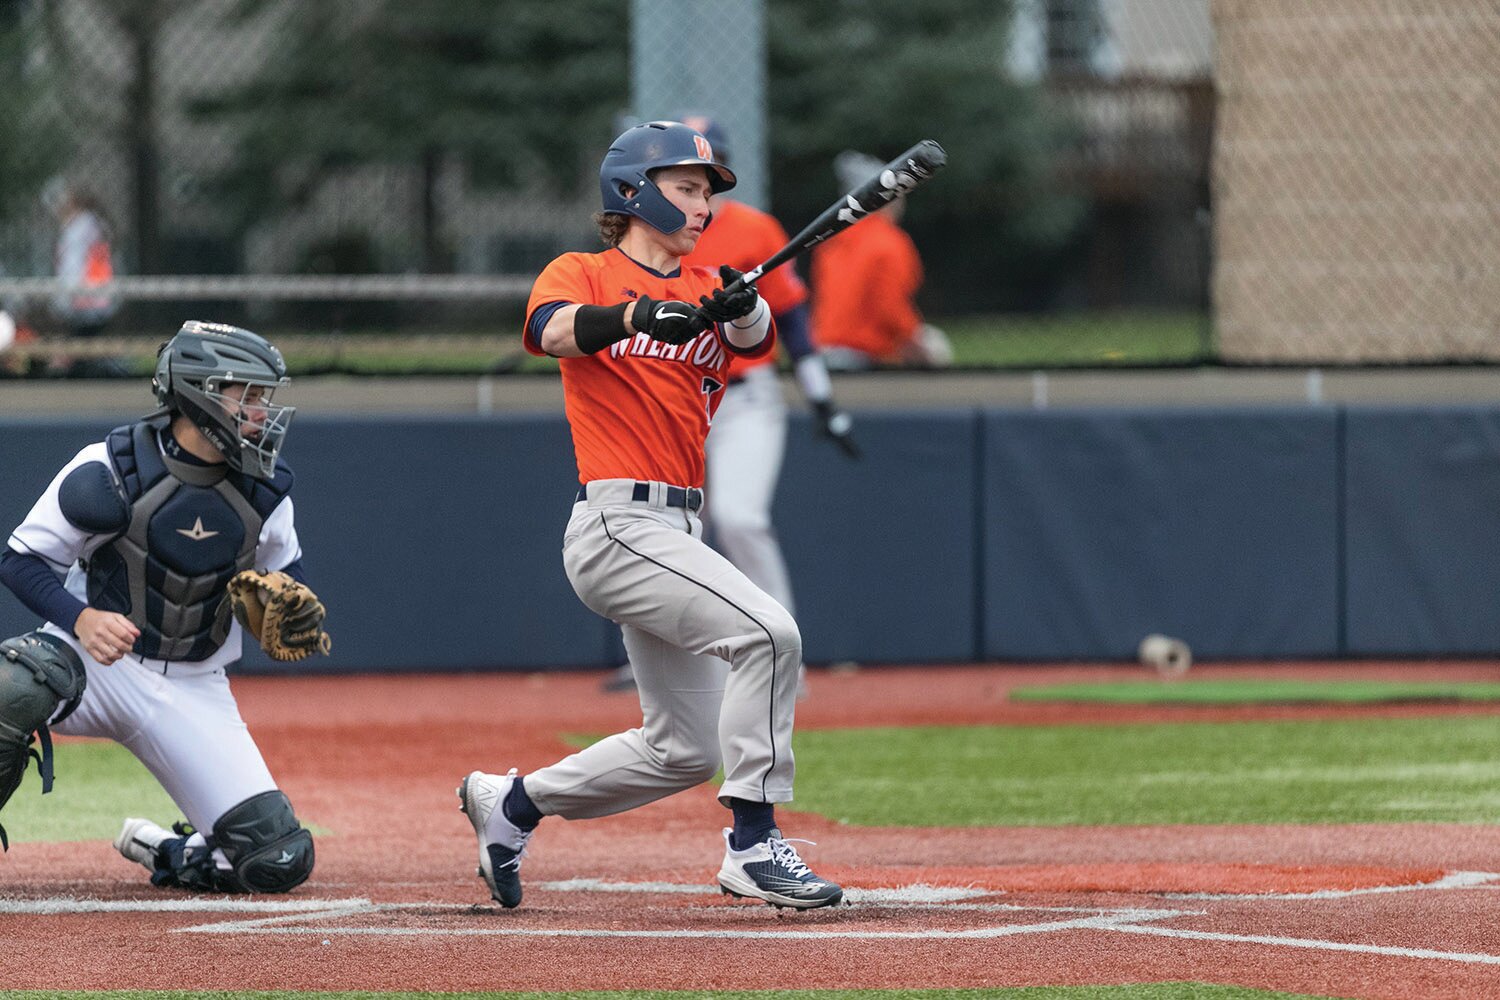 Senior Ben Weaver’s .435 average this spring was the third highest season in Wheaton history.  The Plumstead Christian grad’s 67 hits were fourth best.  Weaver was named first team all-CCIW and second team All-Region 8.